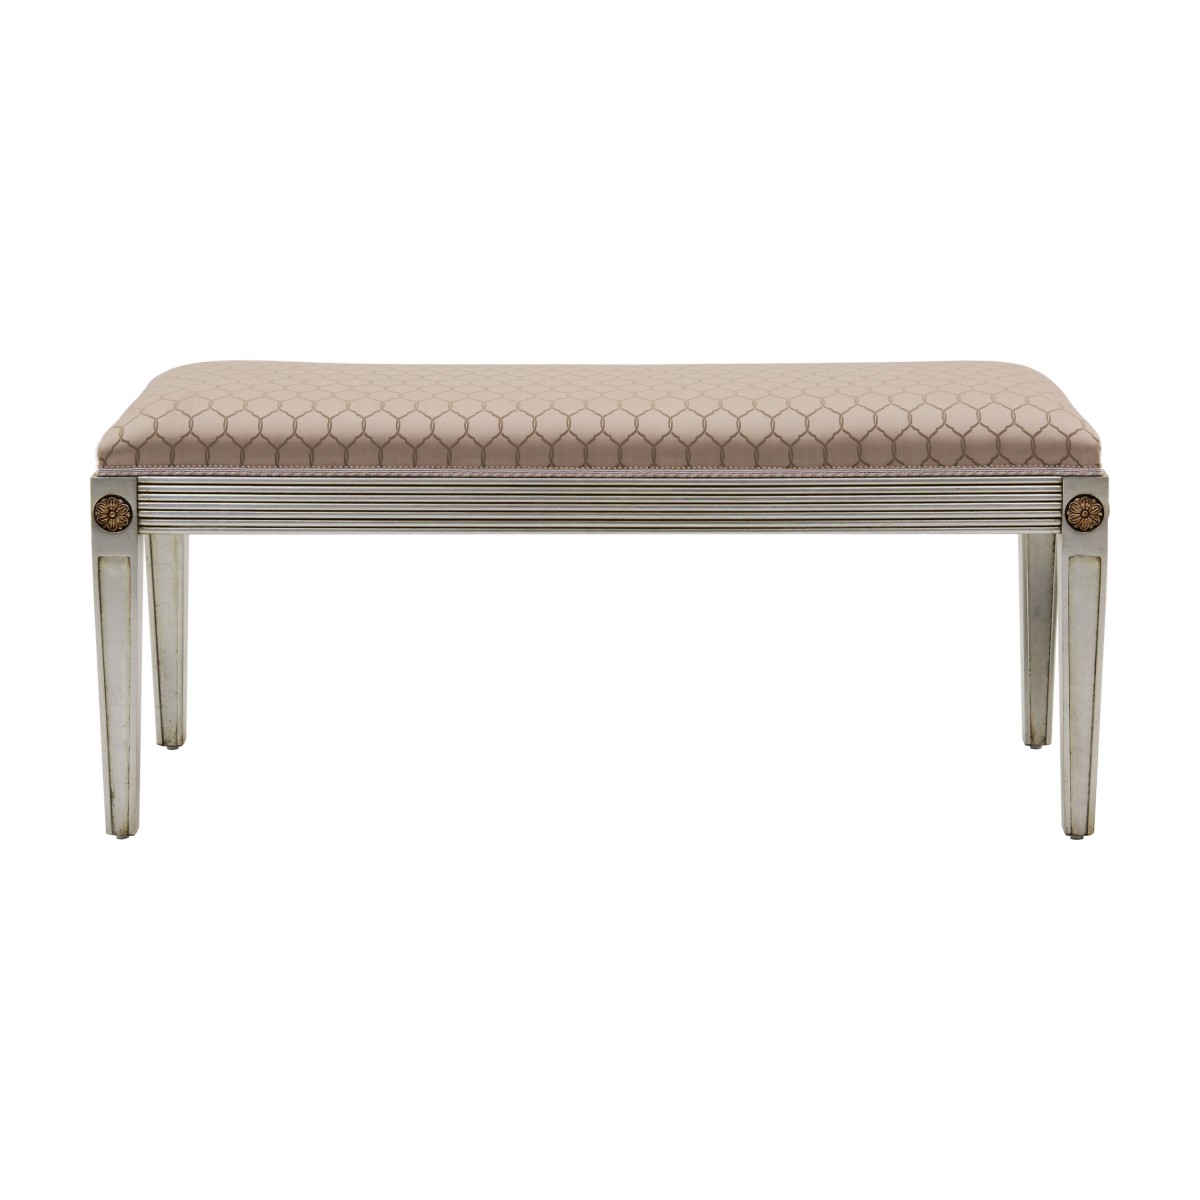 classic style wooden bench